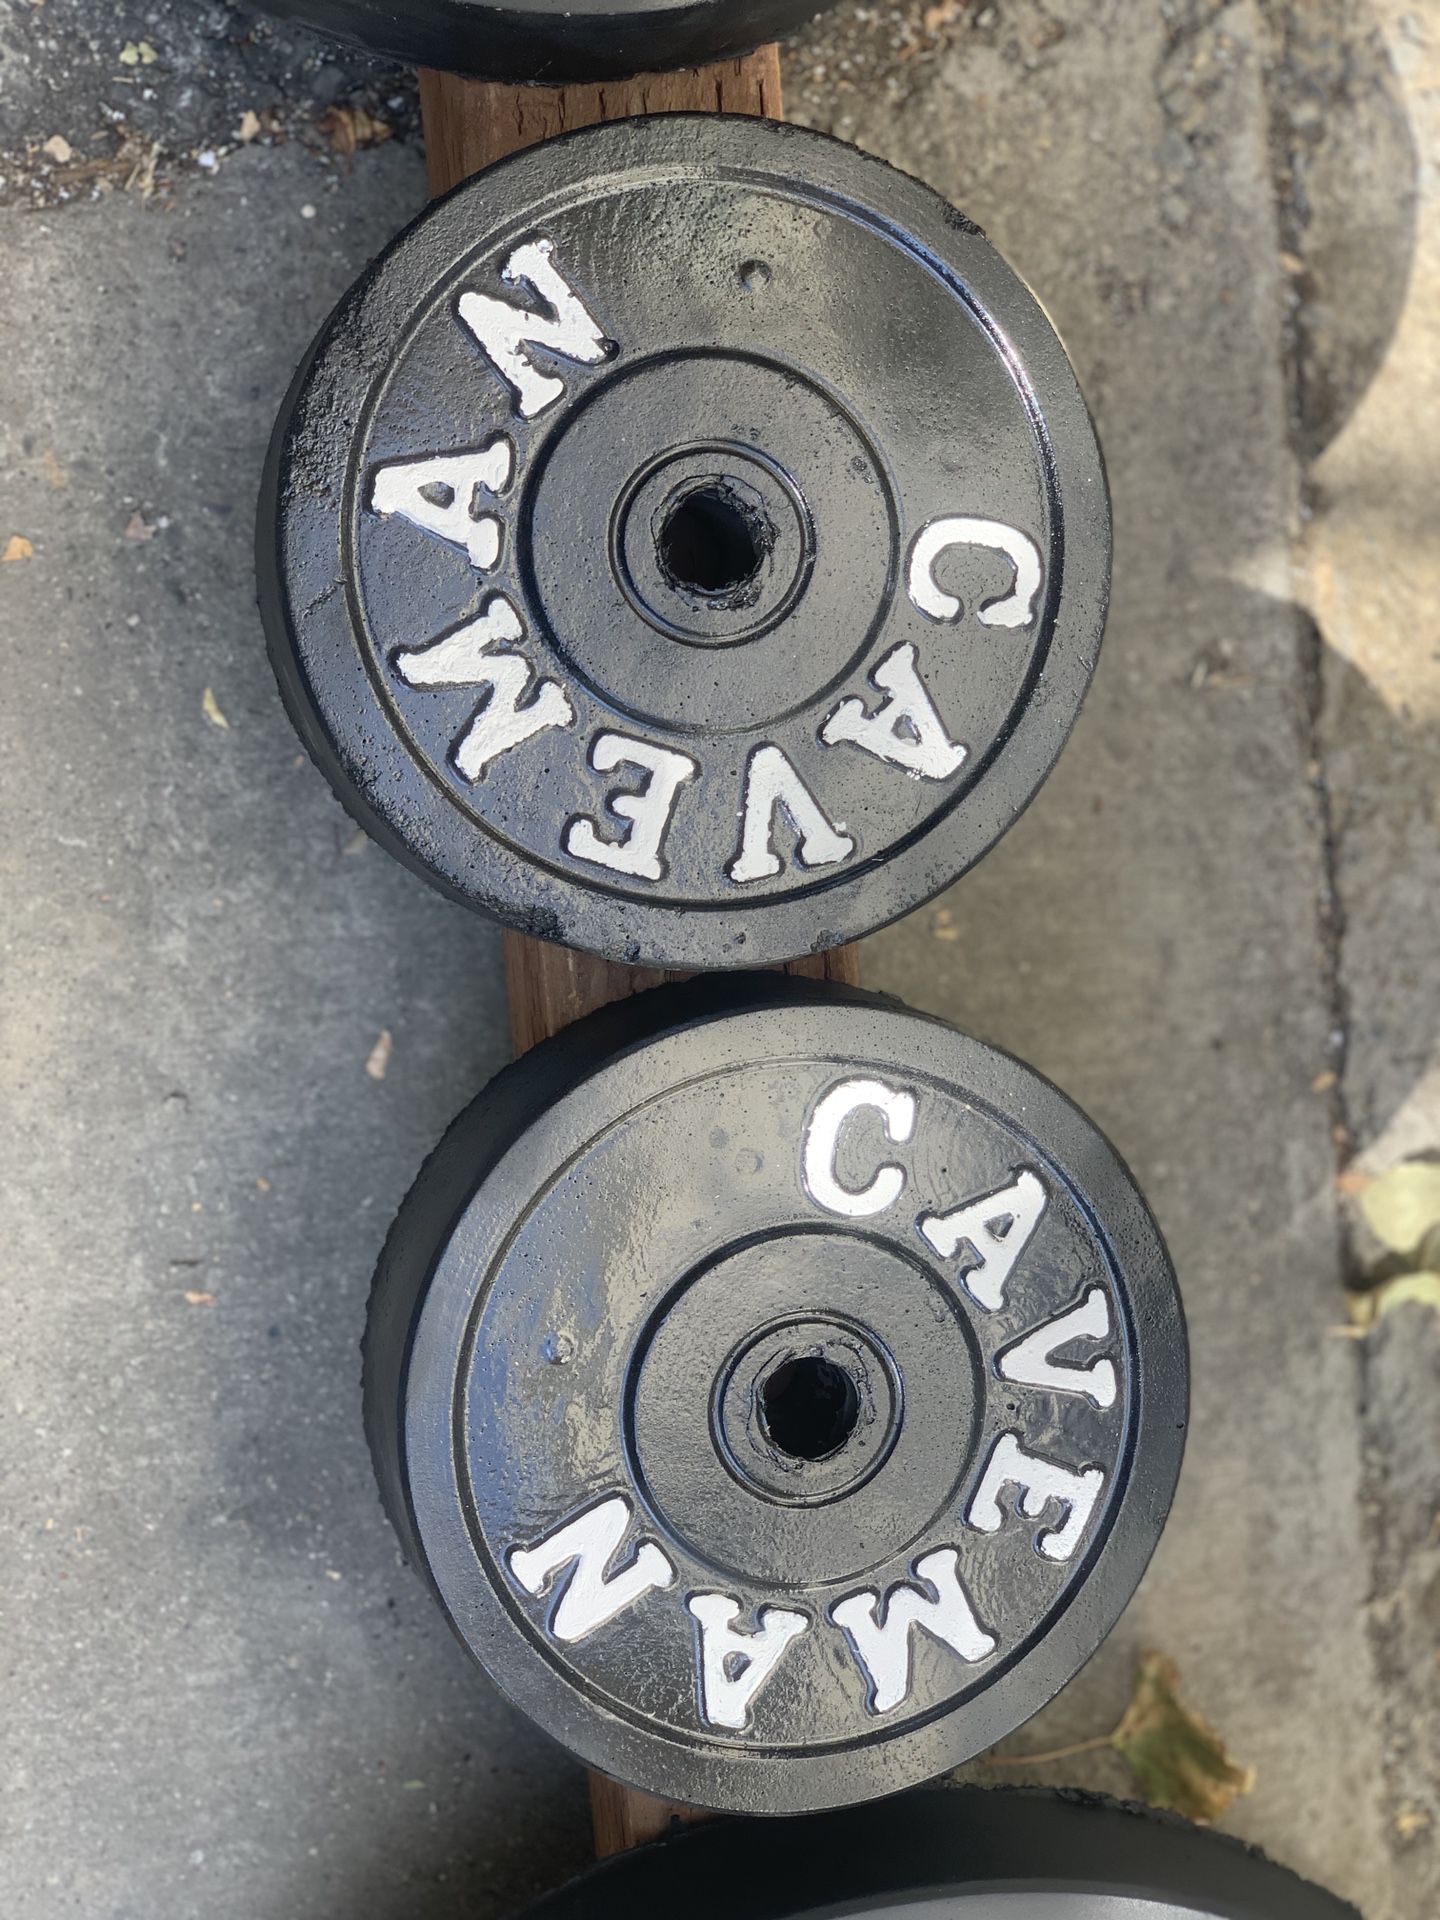 Concrete Weight Mold for Sale in Whittier, CA - OfferUp